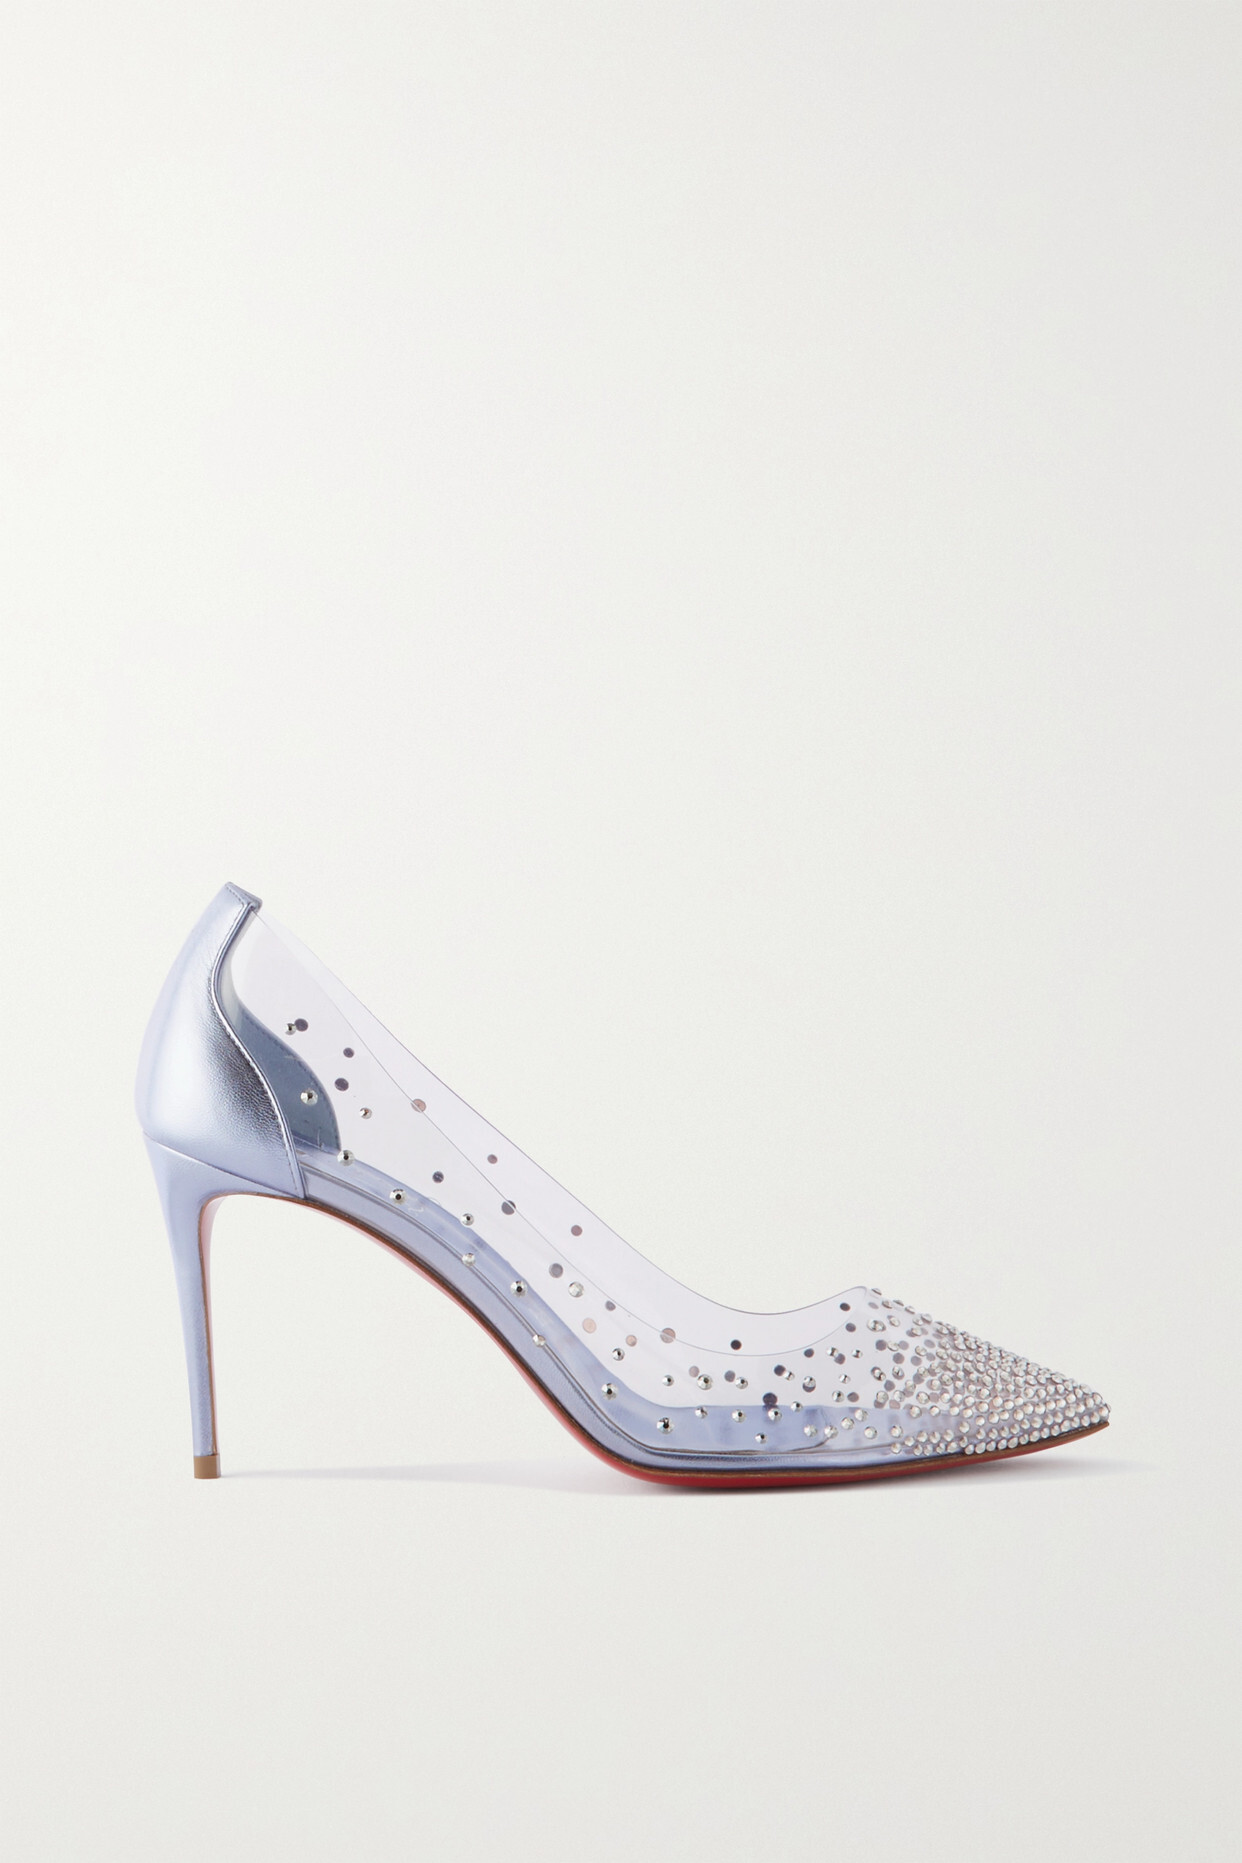 Christian Louboutin - Degrastrass 85 Crystal-embellished Pvc And Metallic Leather Pumps - Silver